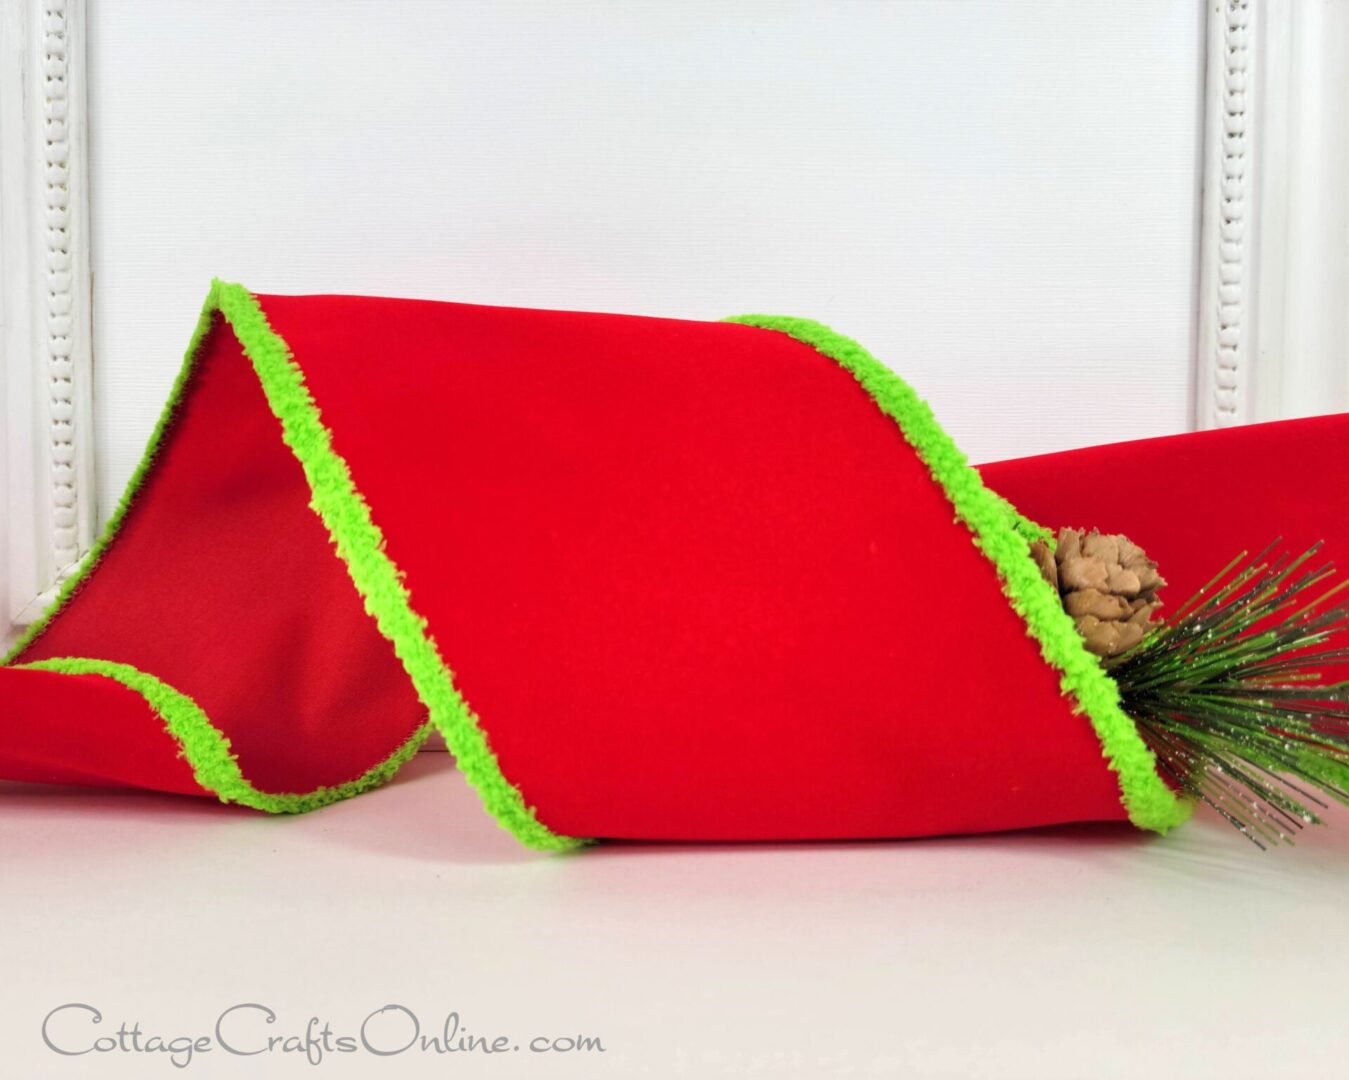 Red velvet with lime green chenille edge 4" wide wired ribbon from the Etsy shop of Cottage Crafts Online.